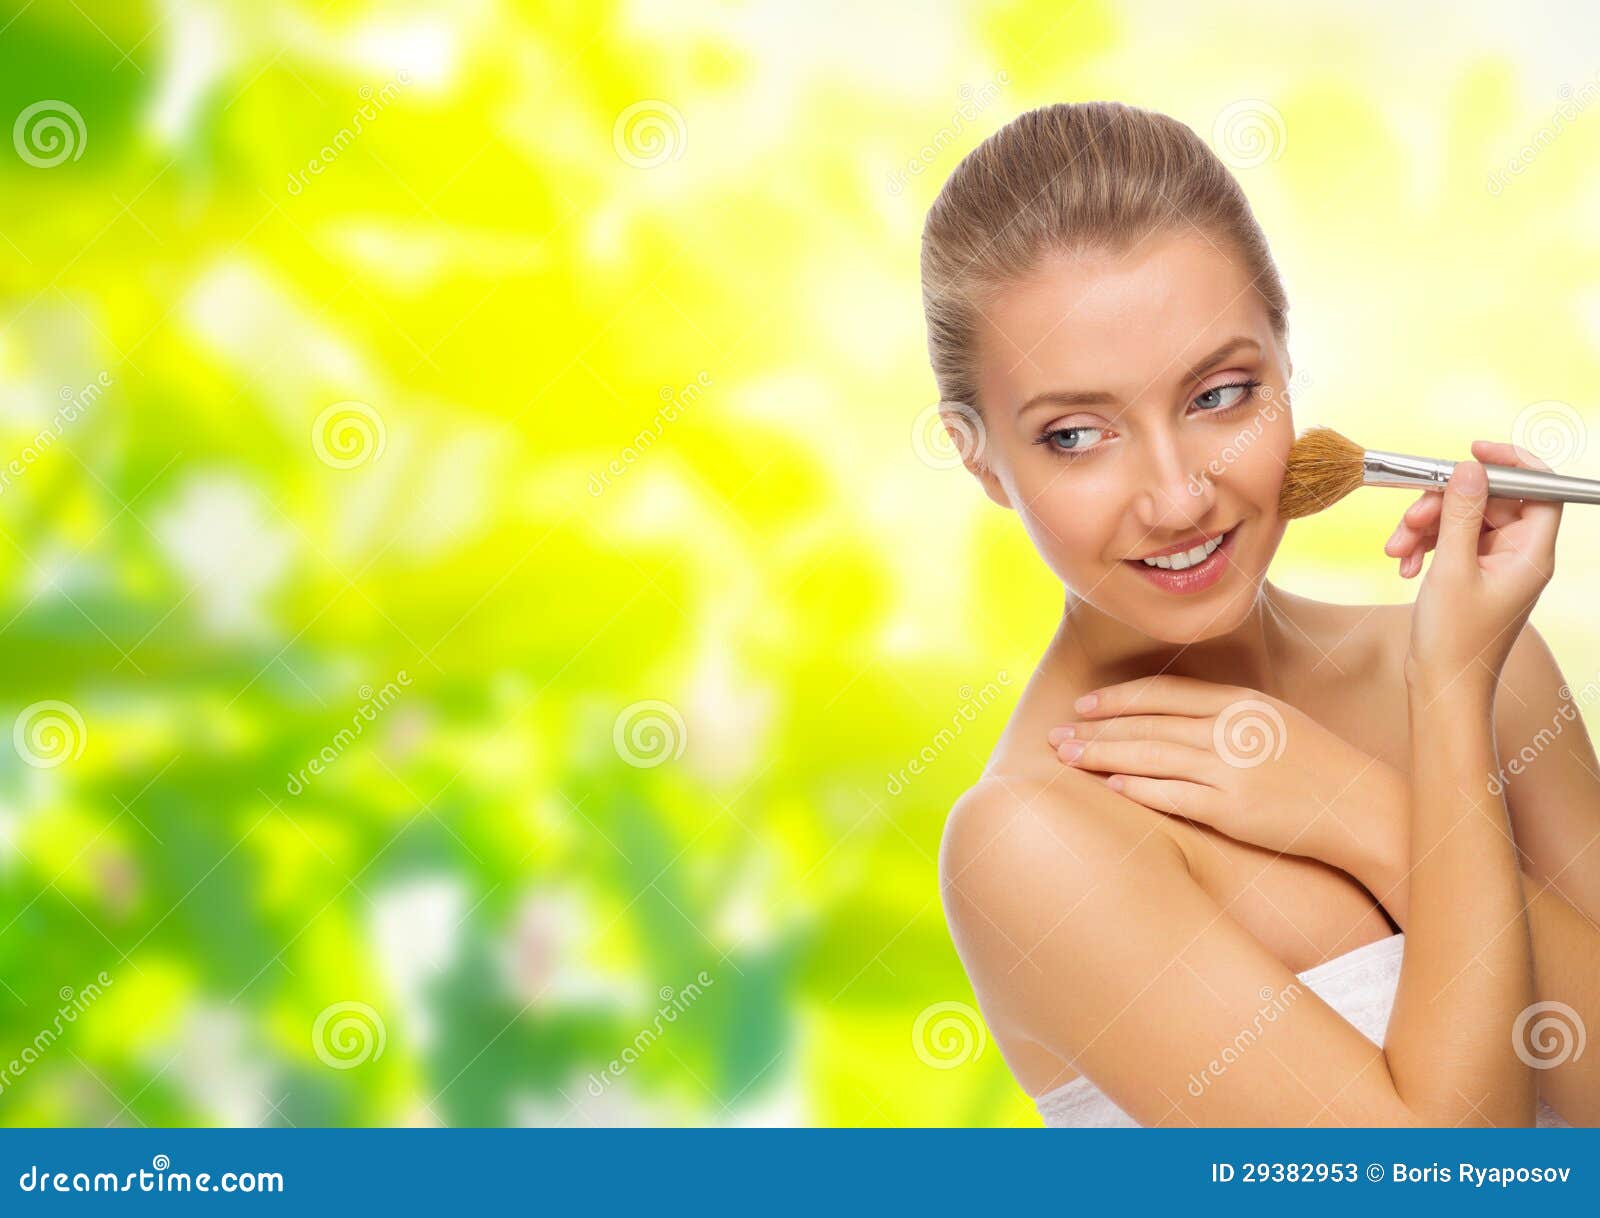 Young Healthy Girl With Makeup Brush Stock Photos  Image: 29382953